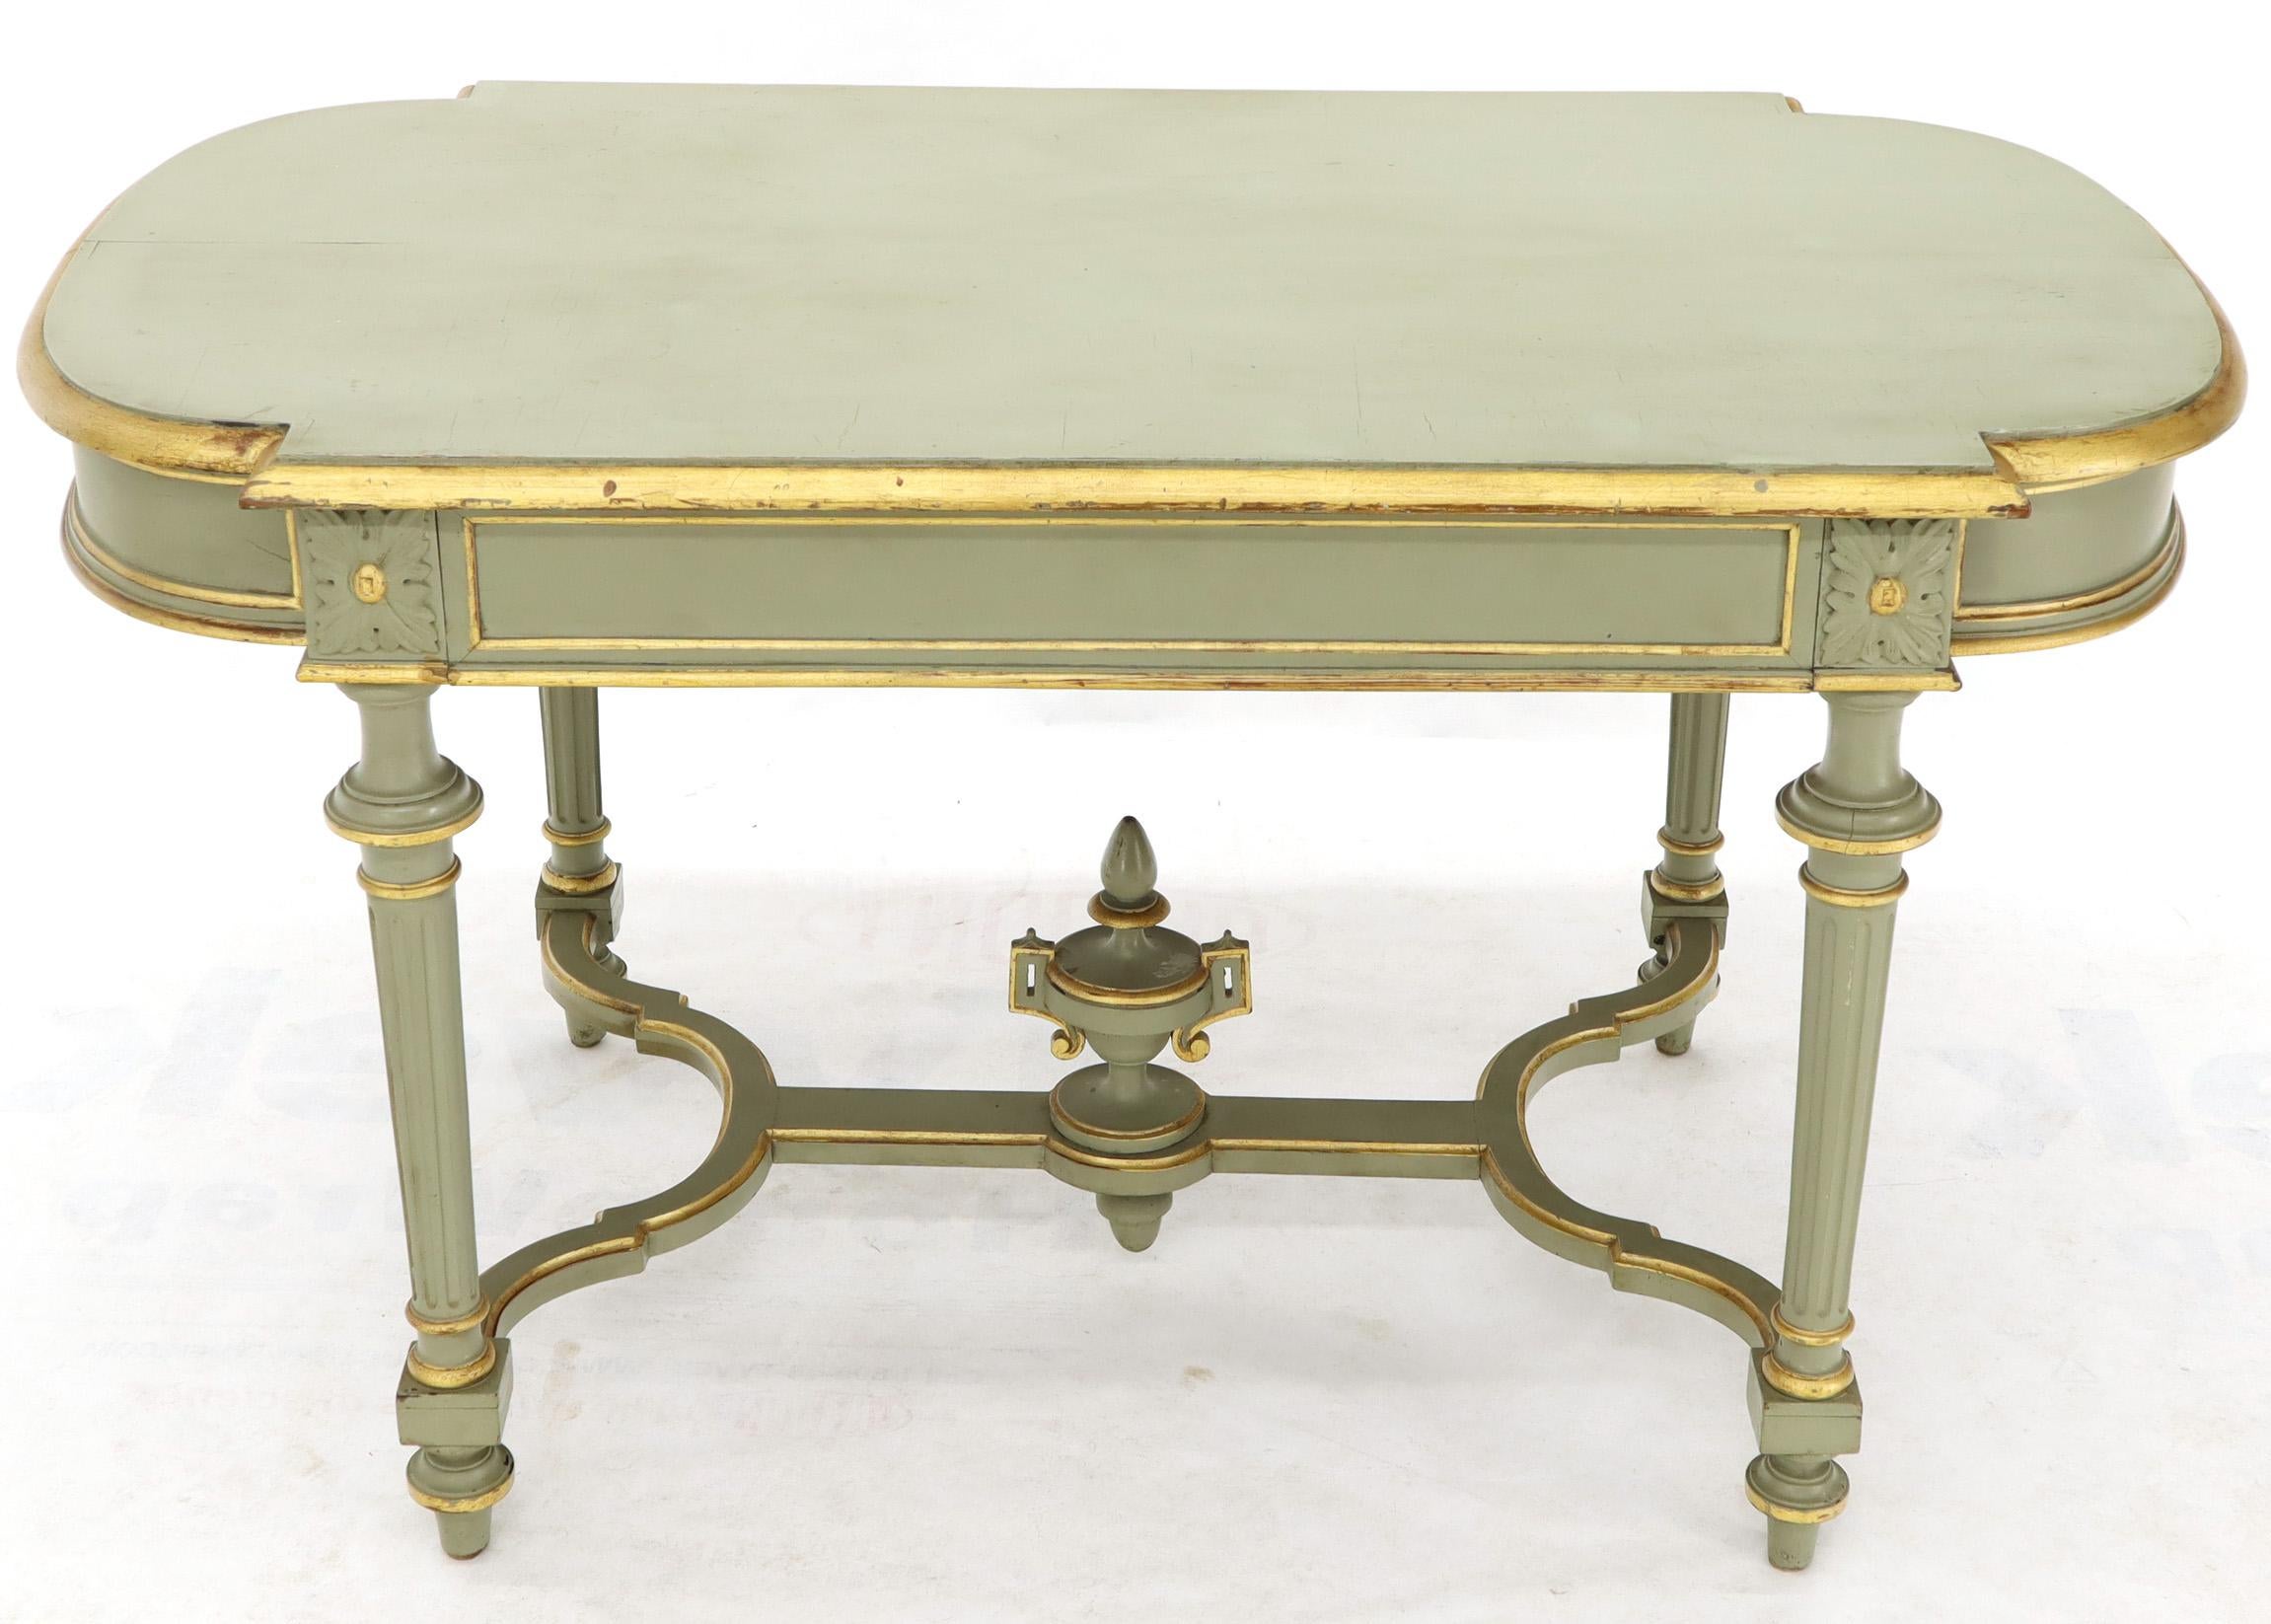 Shabby Chic and Gold Leaf Distressed Antique Writing Table Desk Large Console For Sale 1